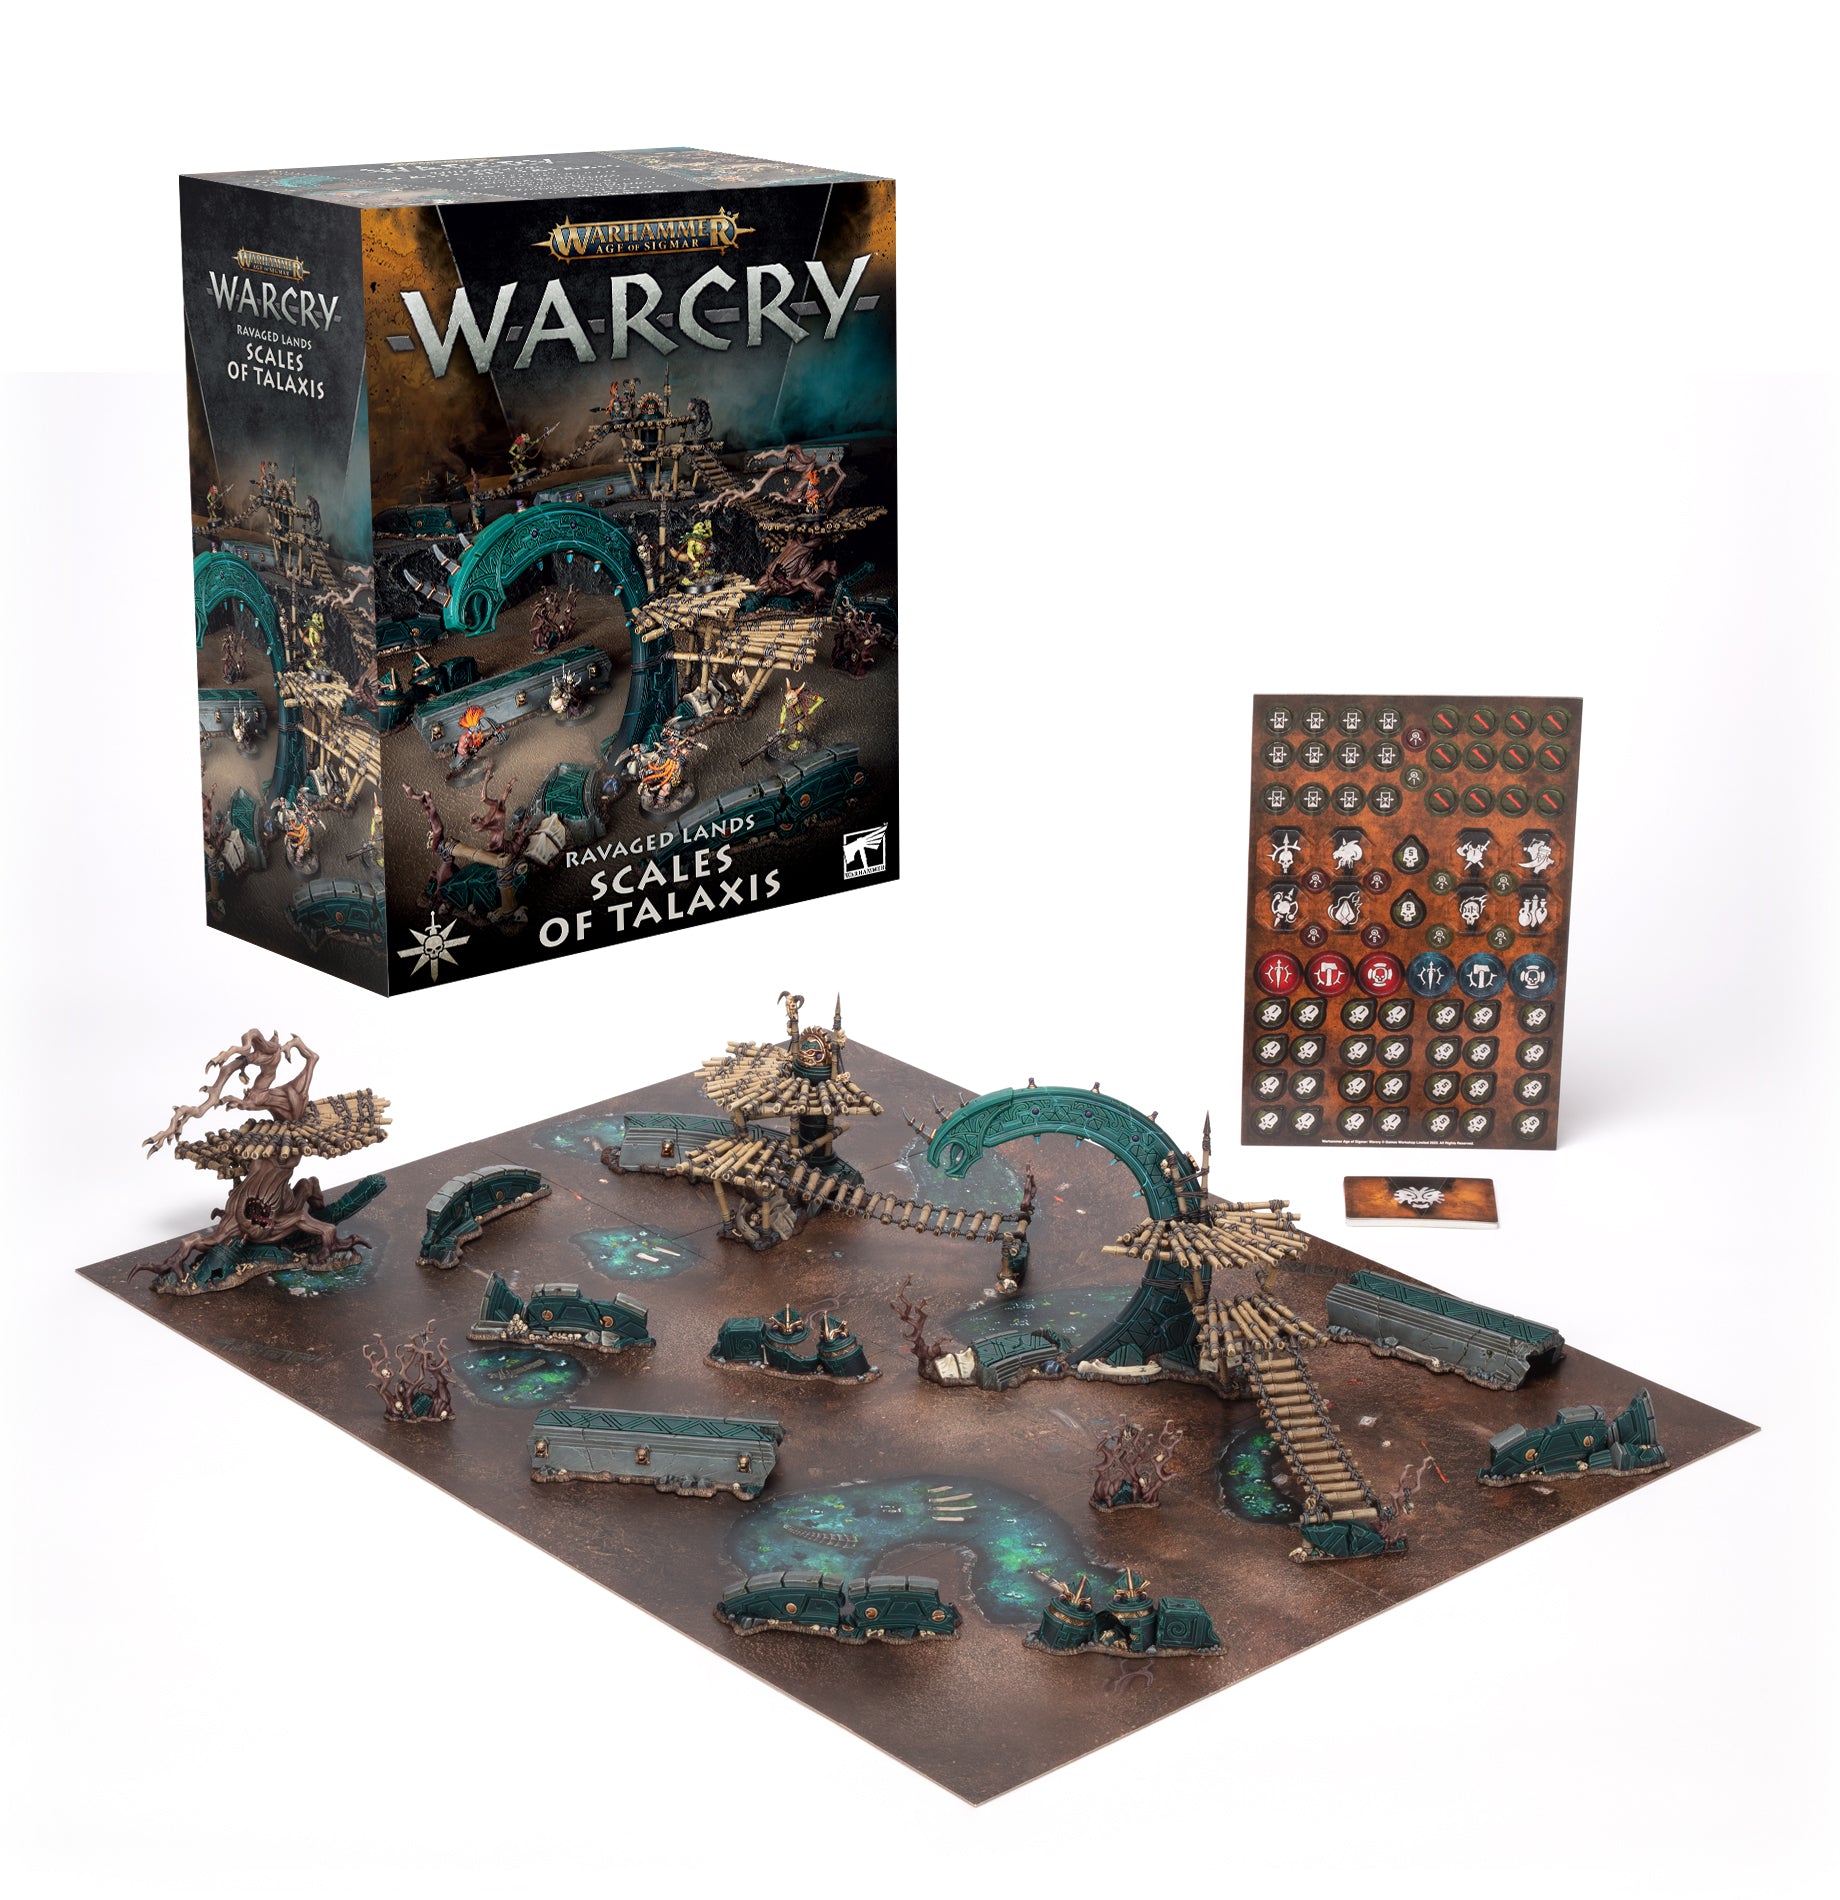 a warcry board game with a box and accessories